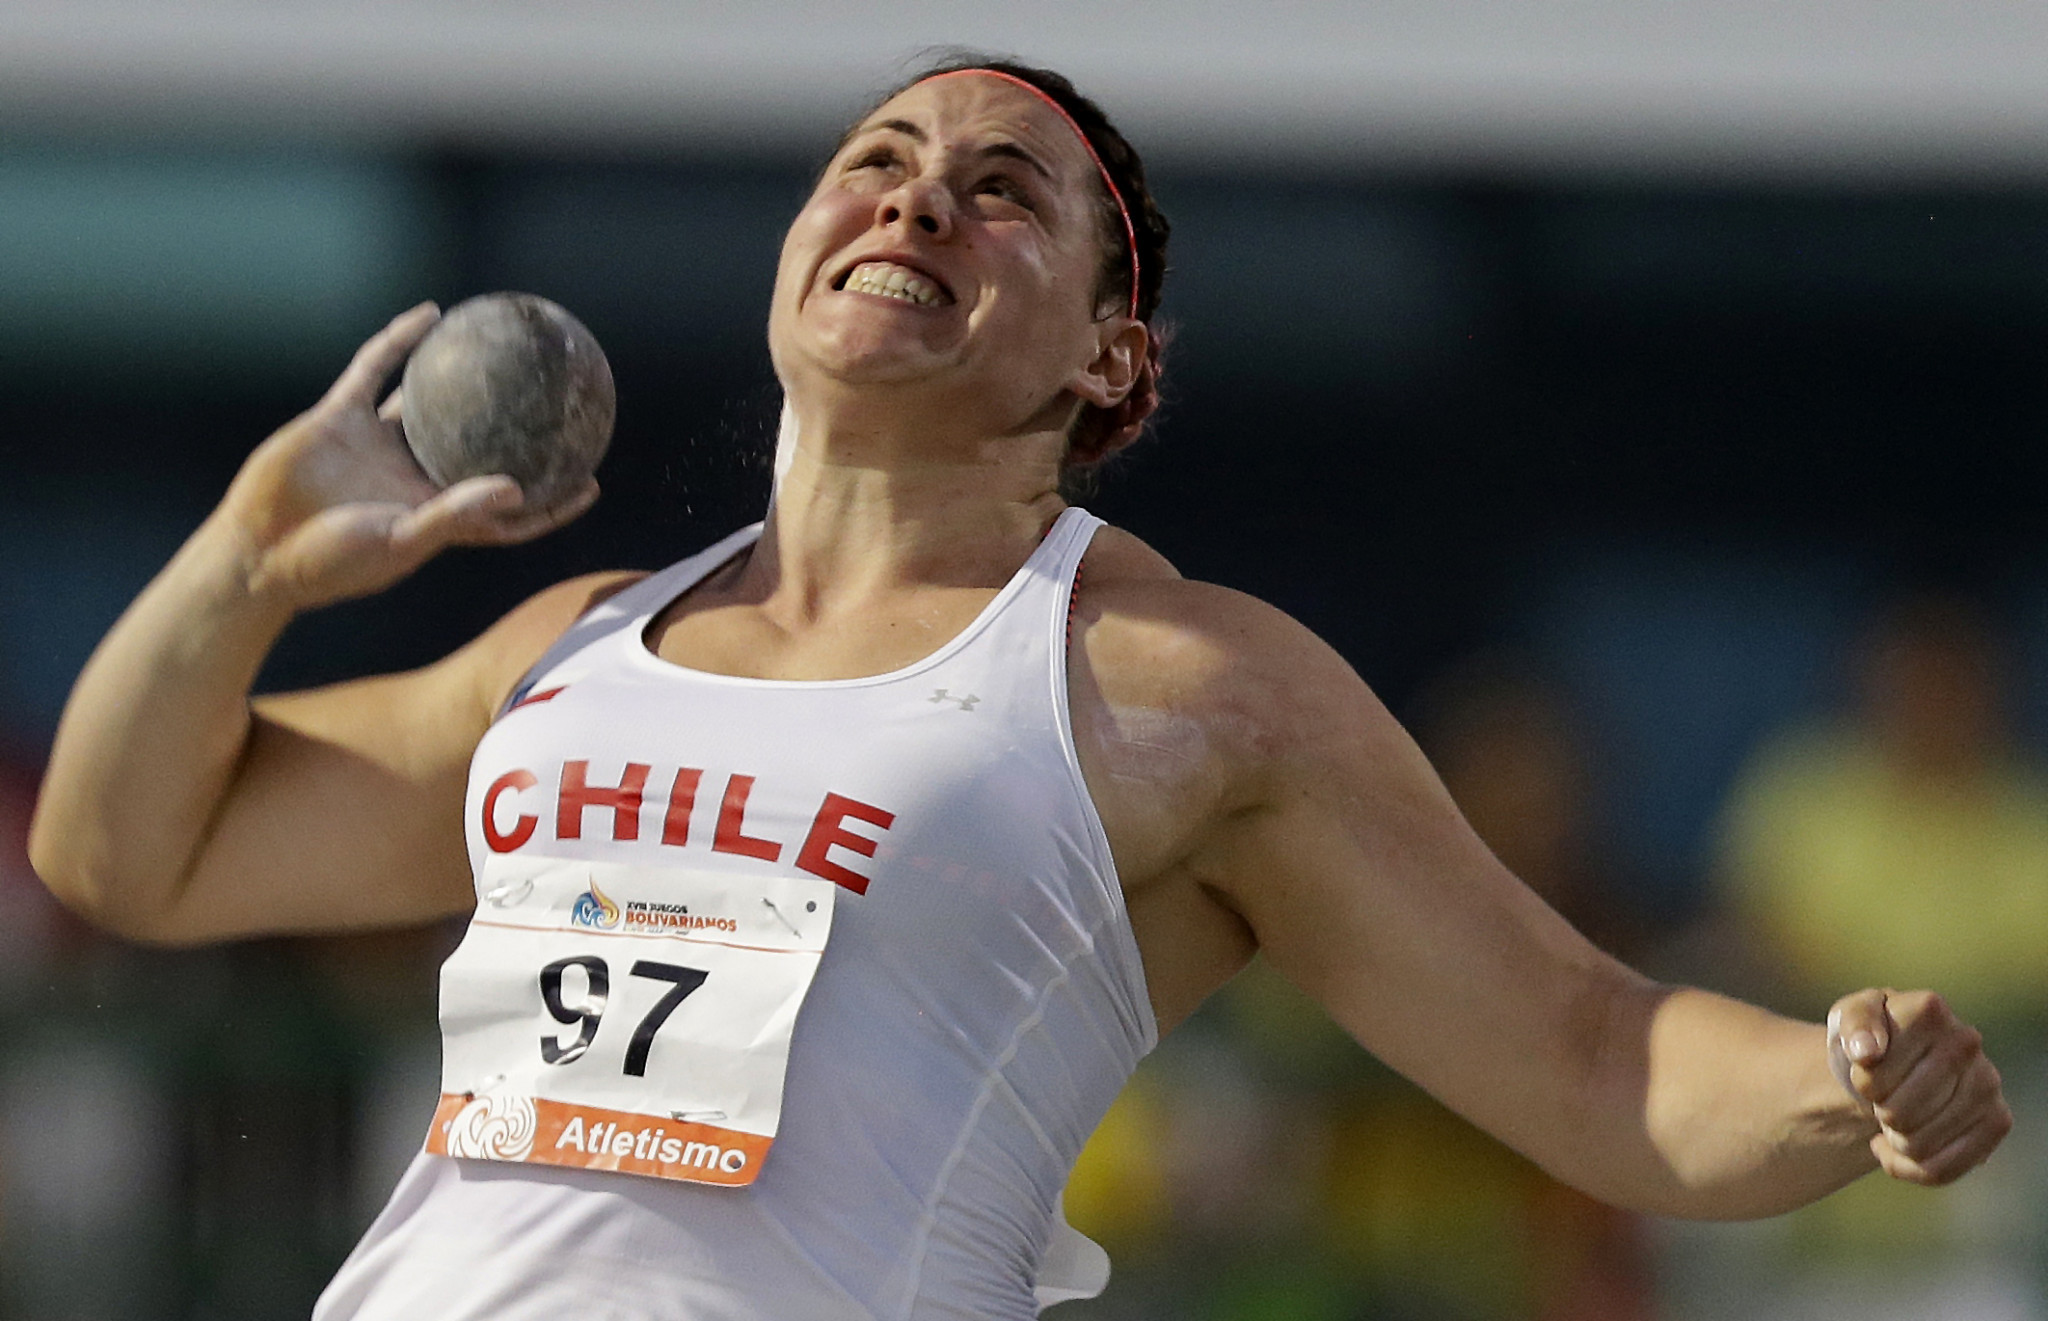 Chilean shot putter suspended after testing positive for banned substance